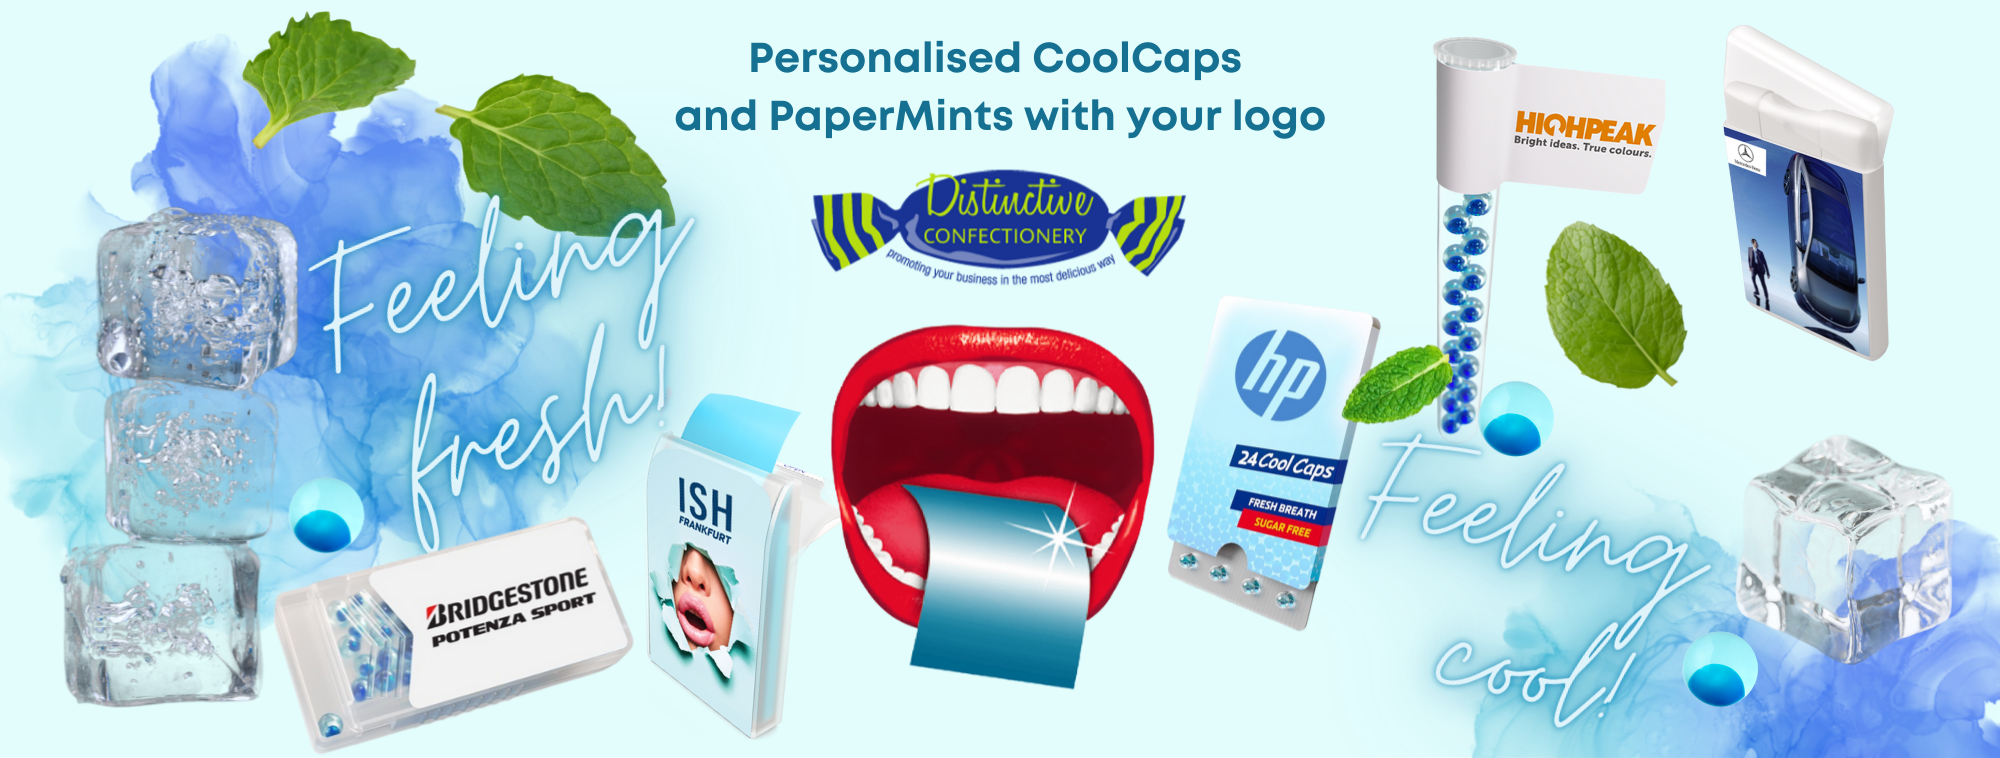 PaperMints and CoolCaps